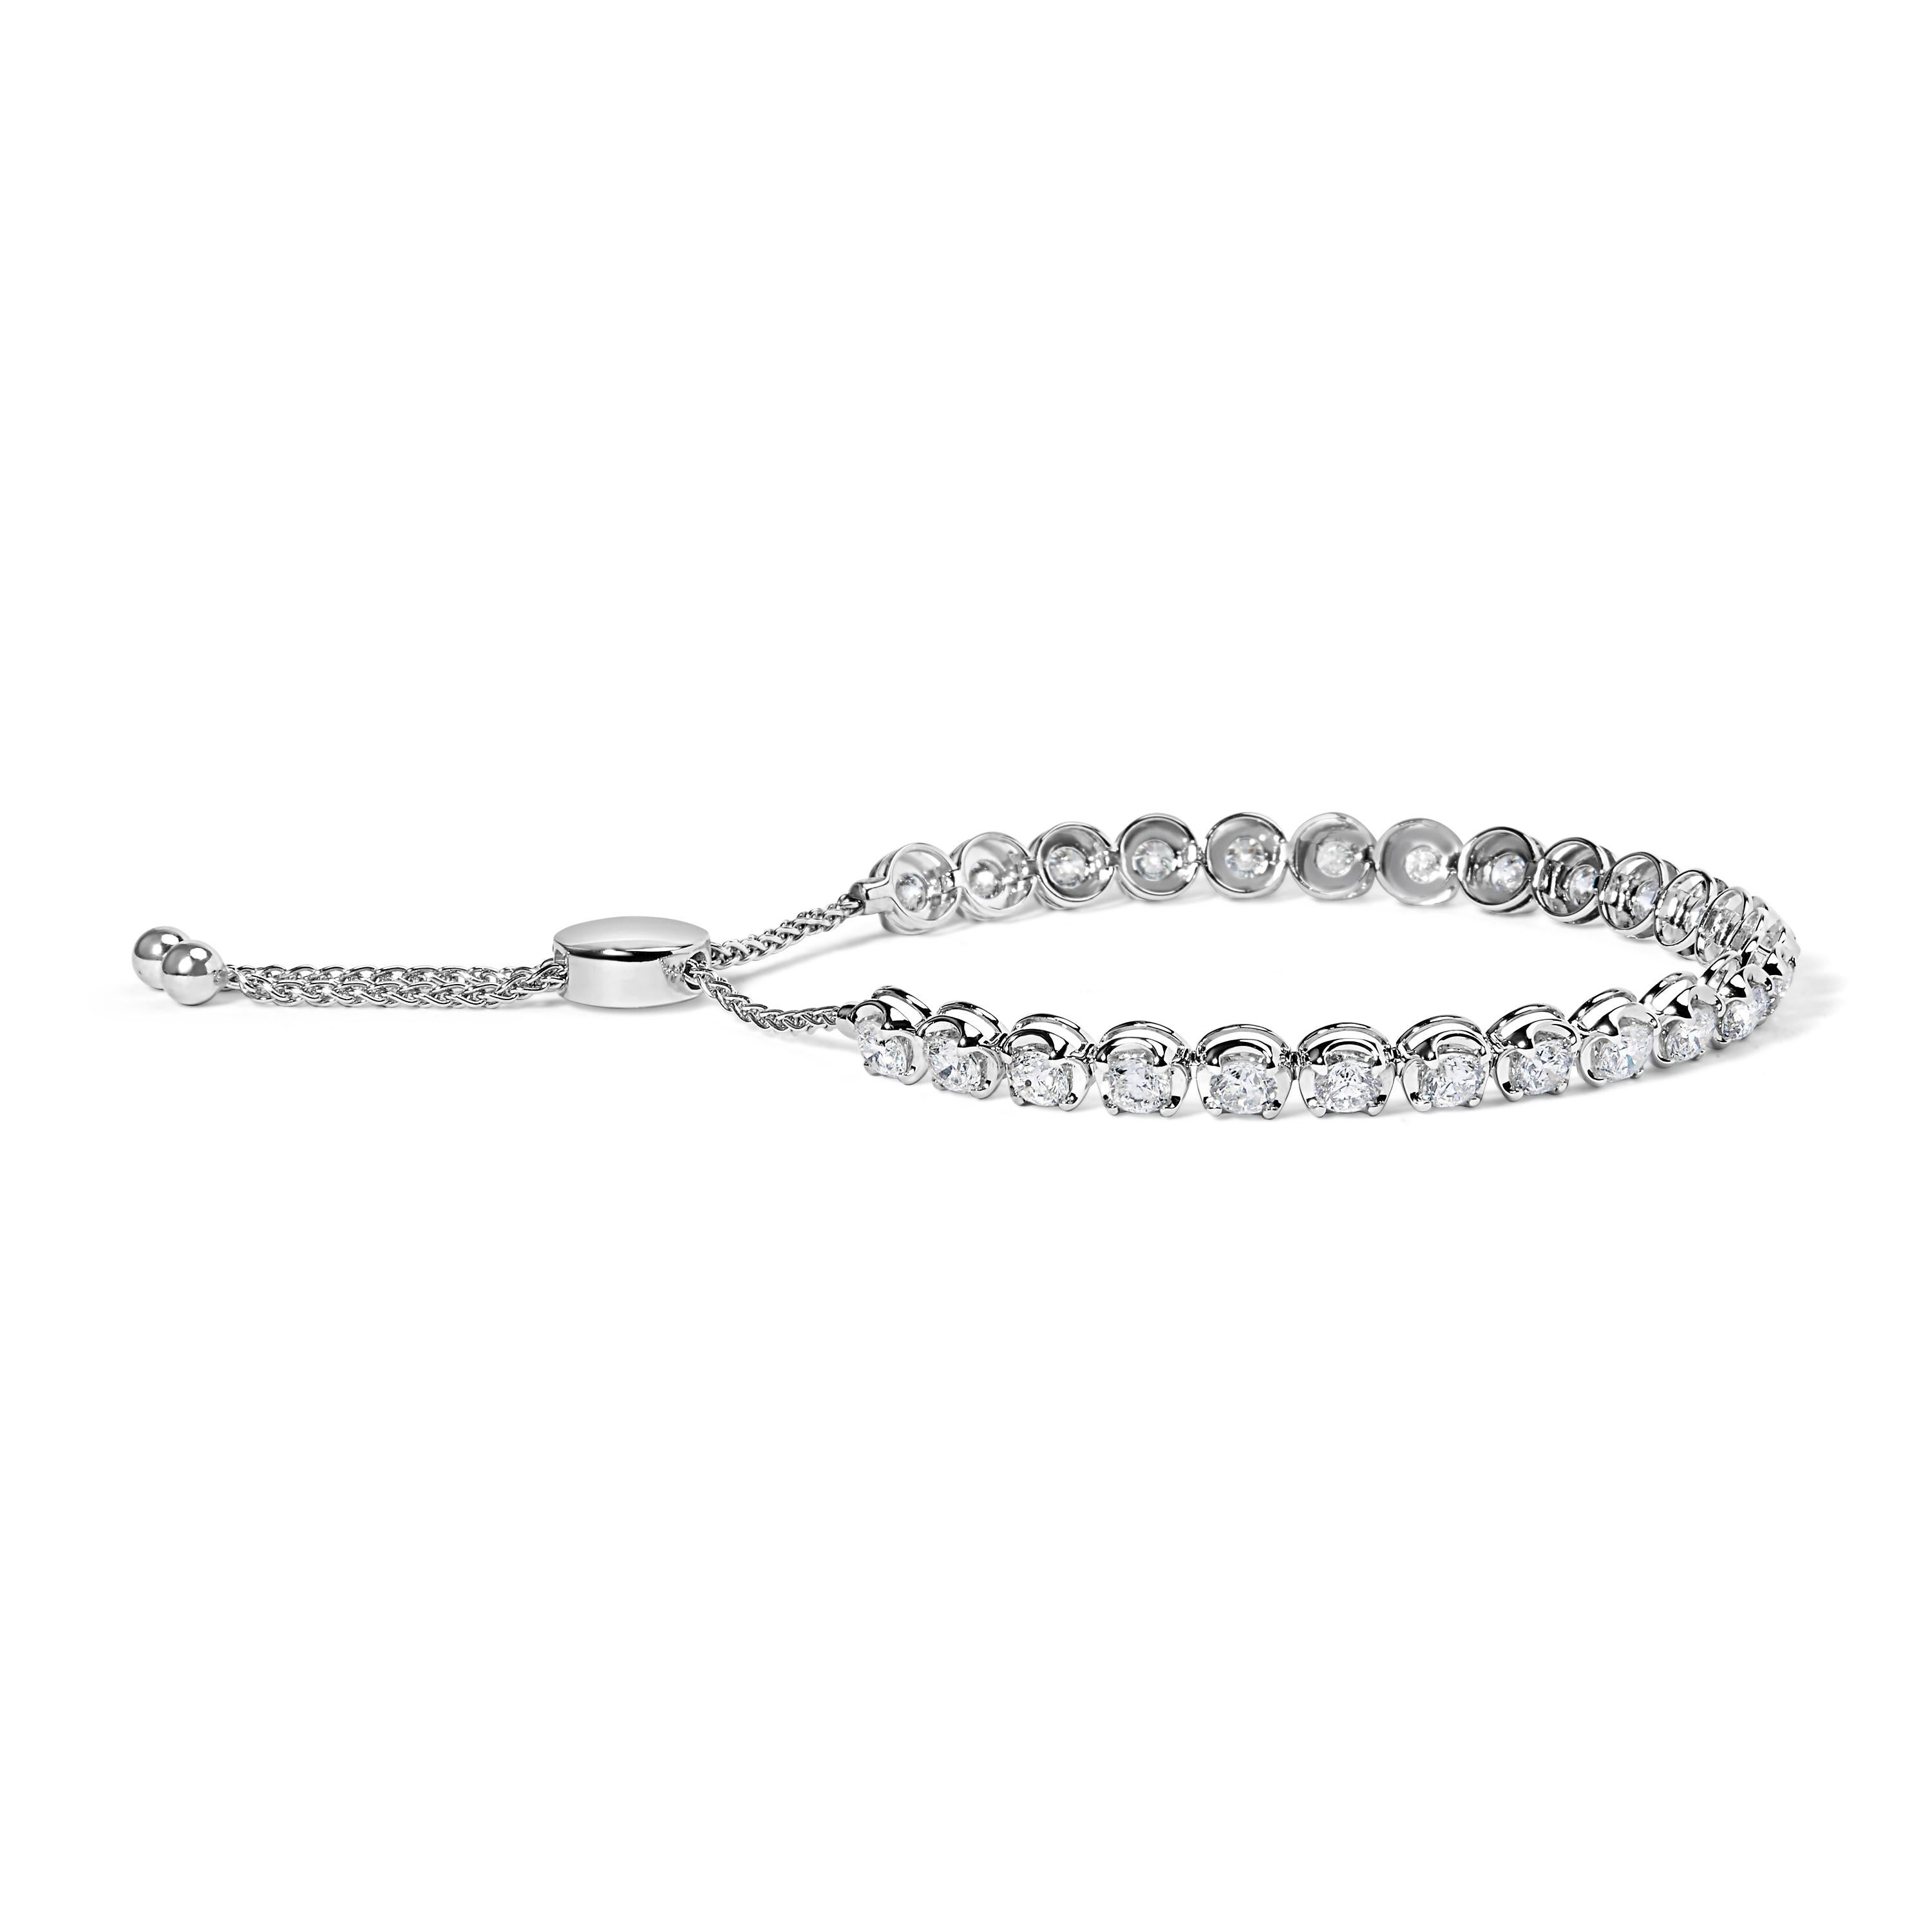 Indulge in the epitome of sophistication with our Diamond Adjustable Bolo Tennis Bracelet. Crafted from radiant 14K white gold, it exudes timeless elegance. Adorned with 25 natural round diamonds totaling 6.0 cttw, they shimmer with undeniable